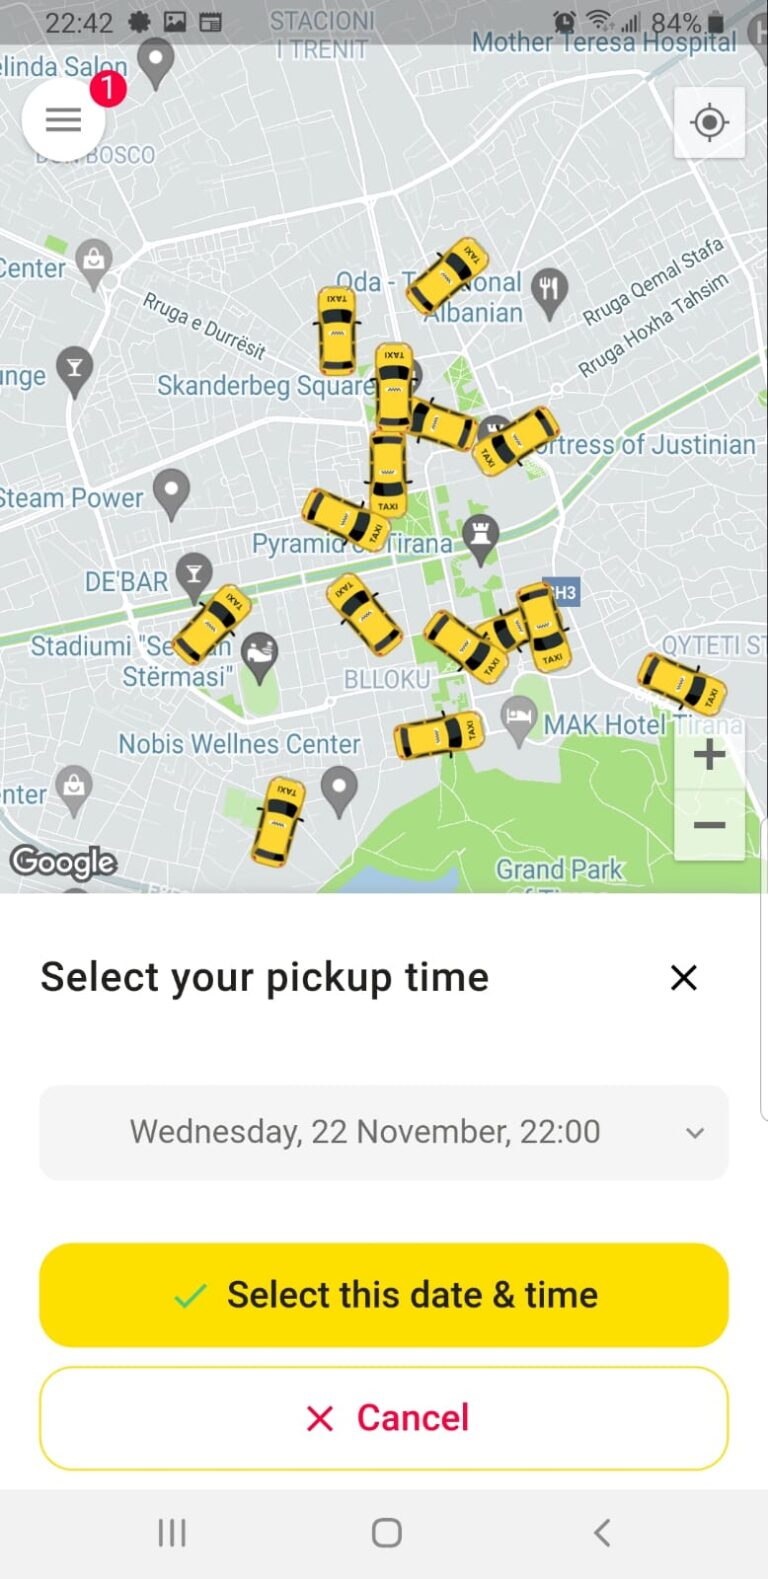 book a taxi - select pickup time